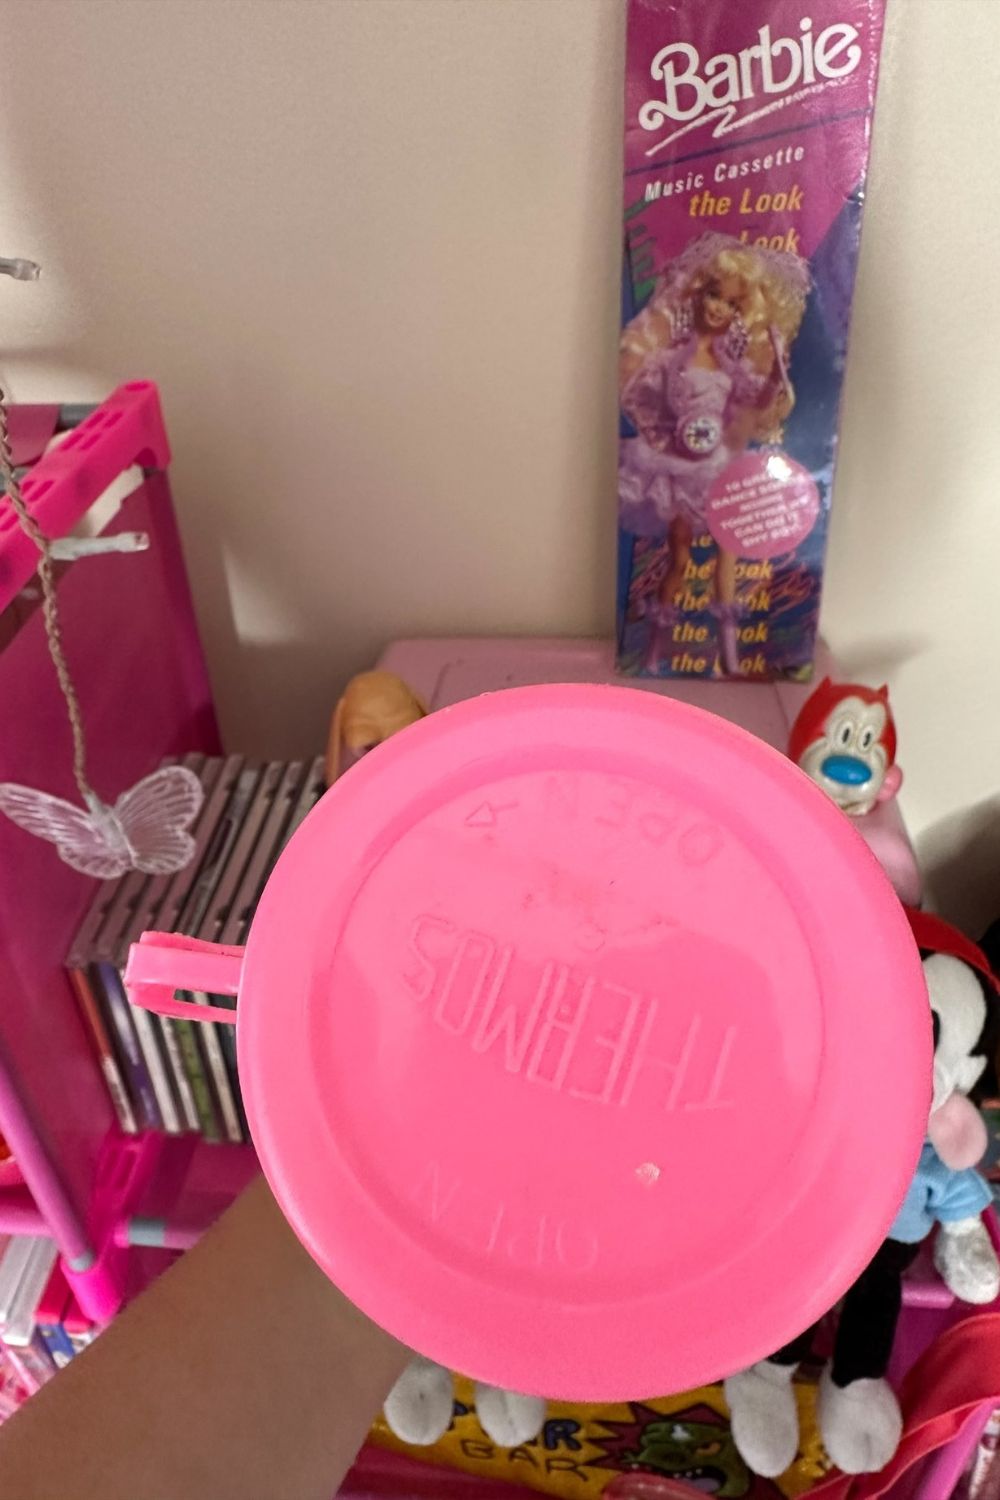 Extremely Rare Holy Grail Vintage Barbie Lunch Box With Thermos - Ruby Lane